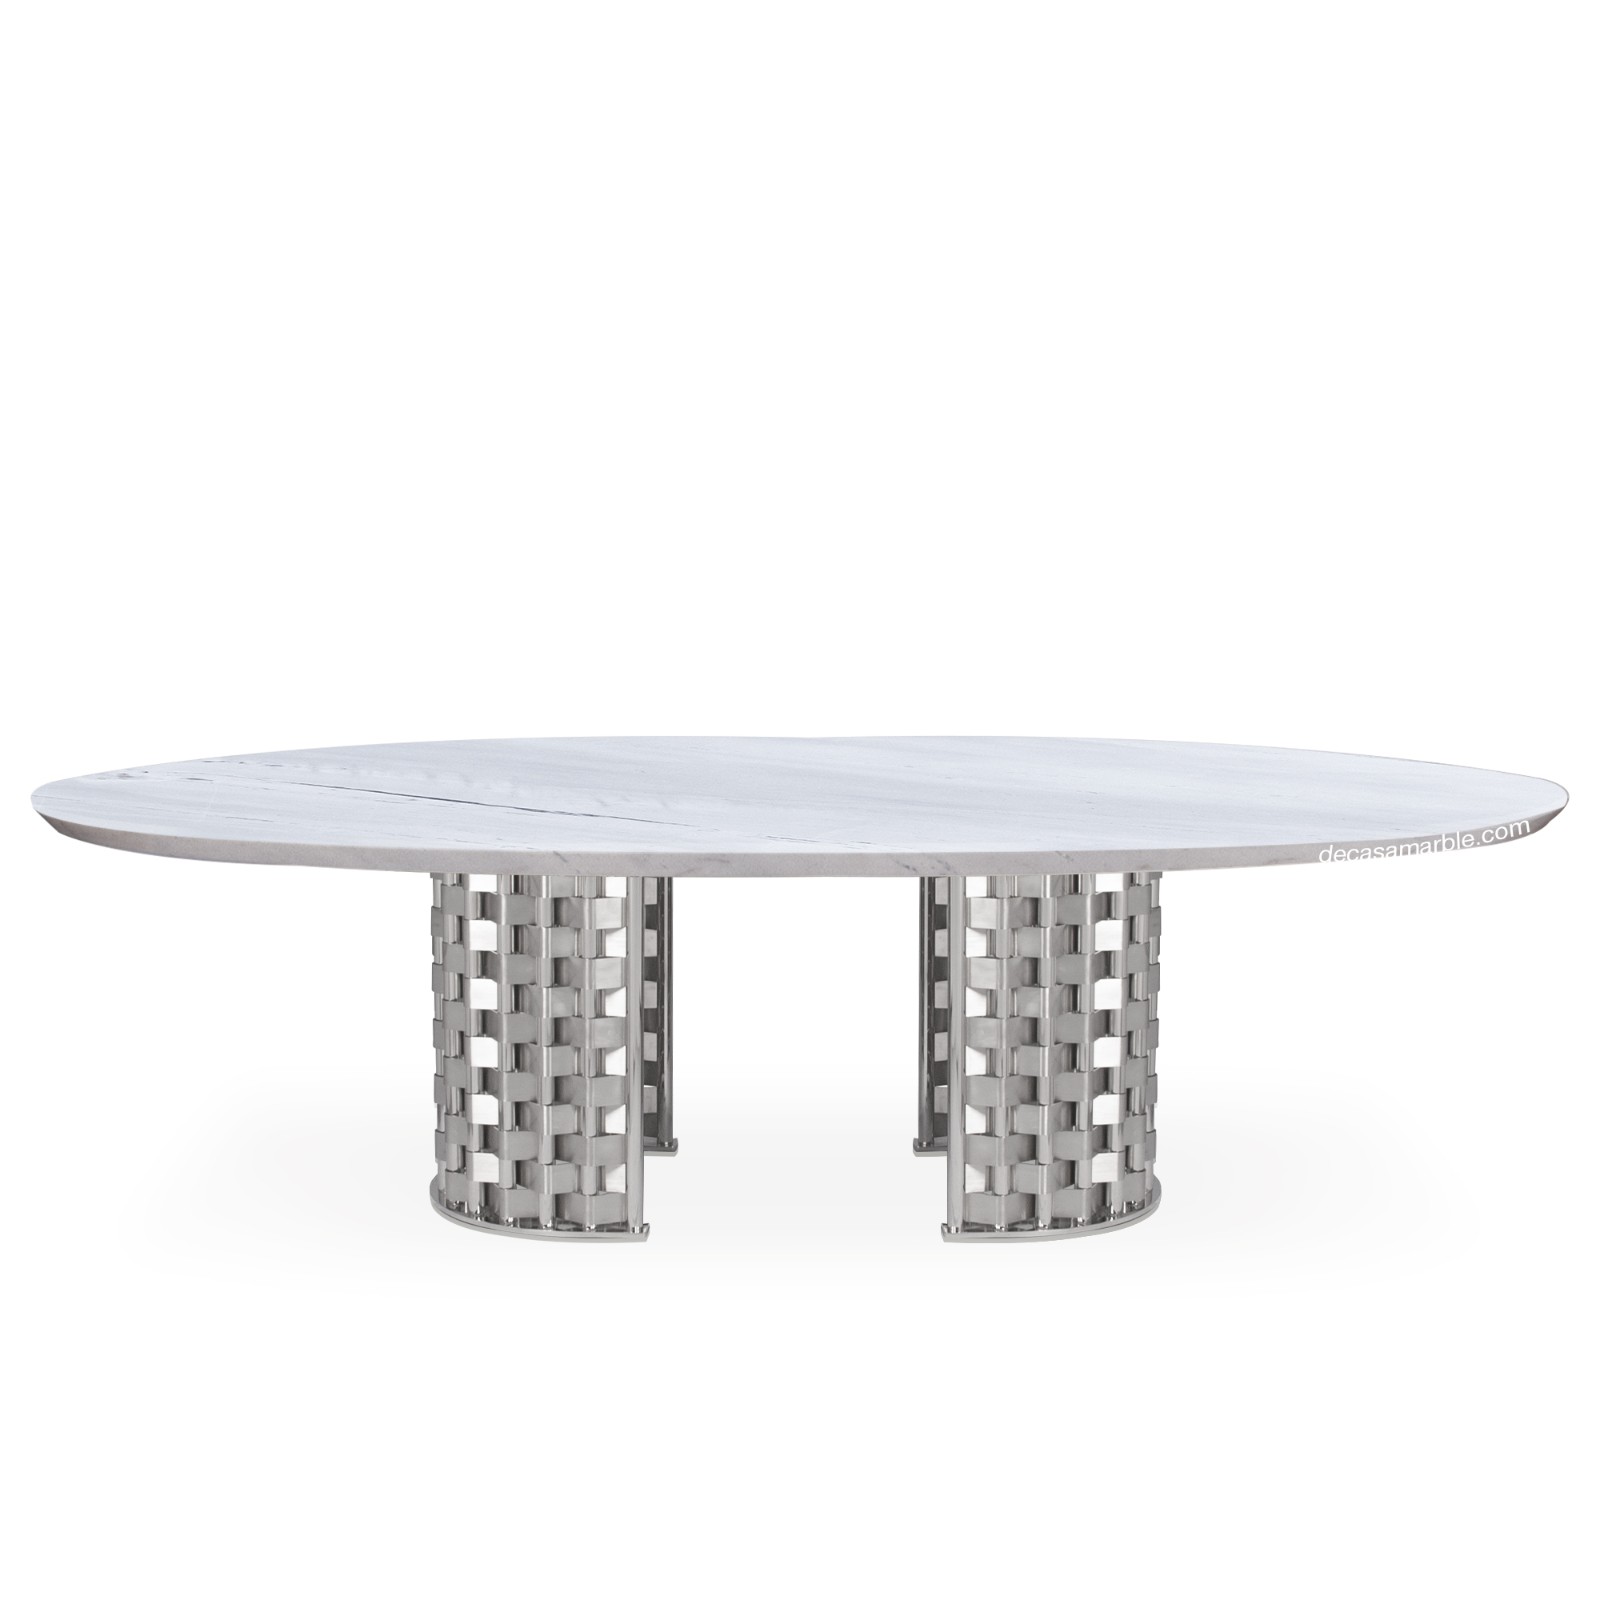 Bertrand E | Art Series | Decasa Marble Marble Dining Table